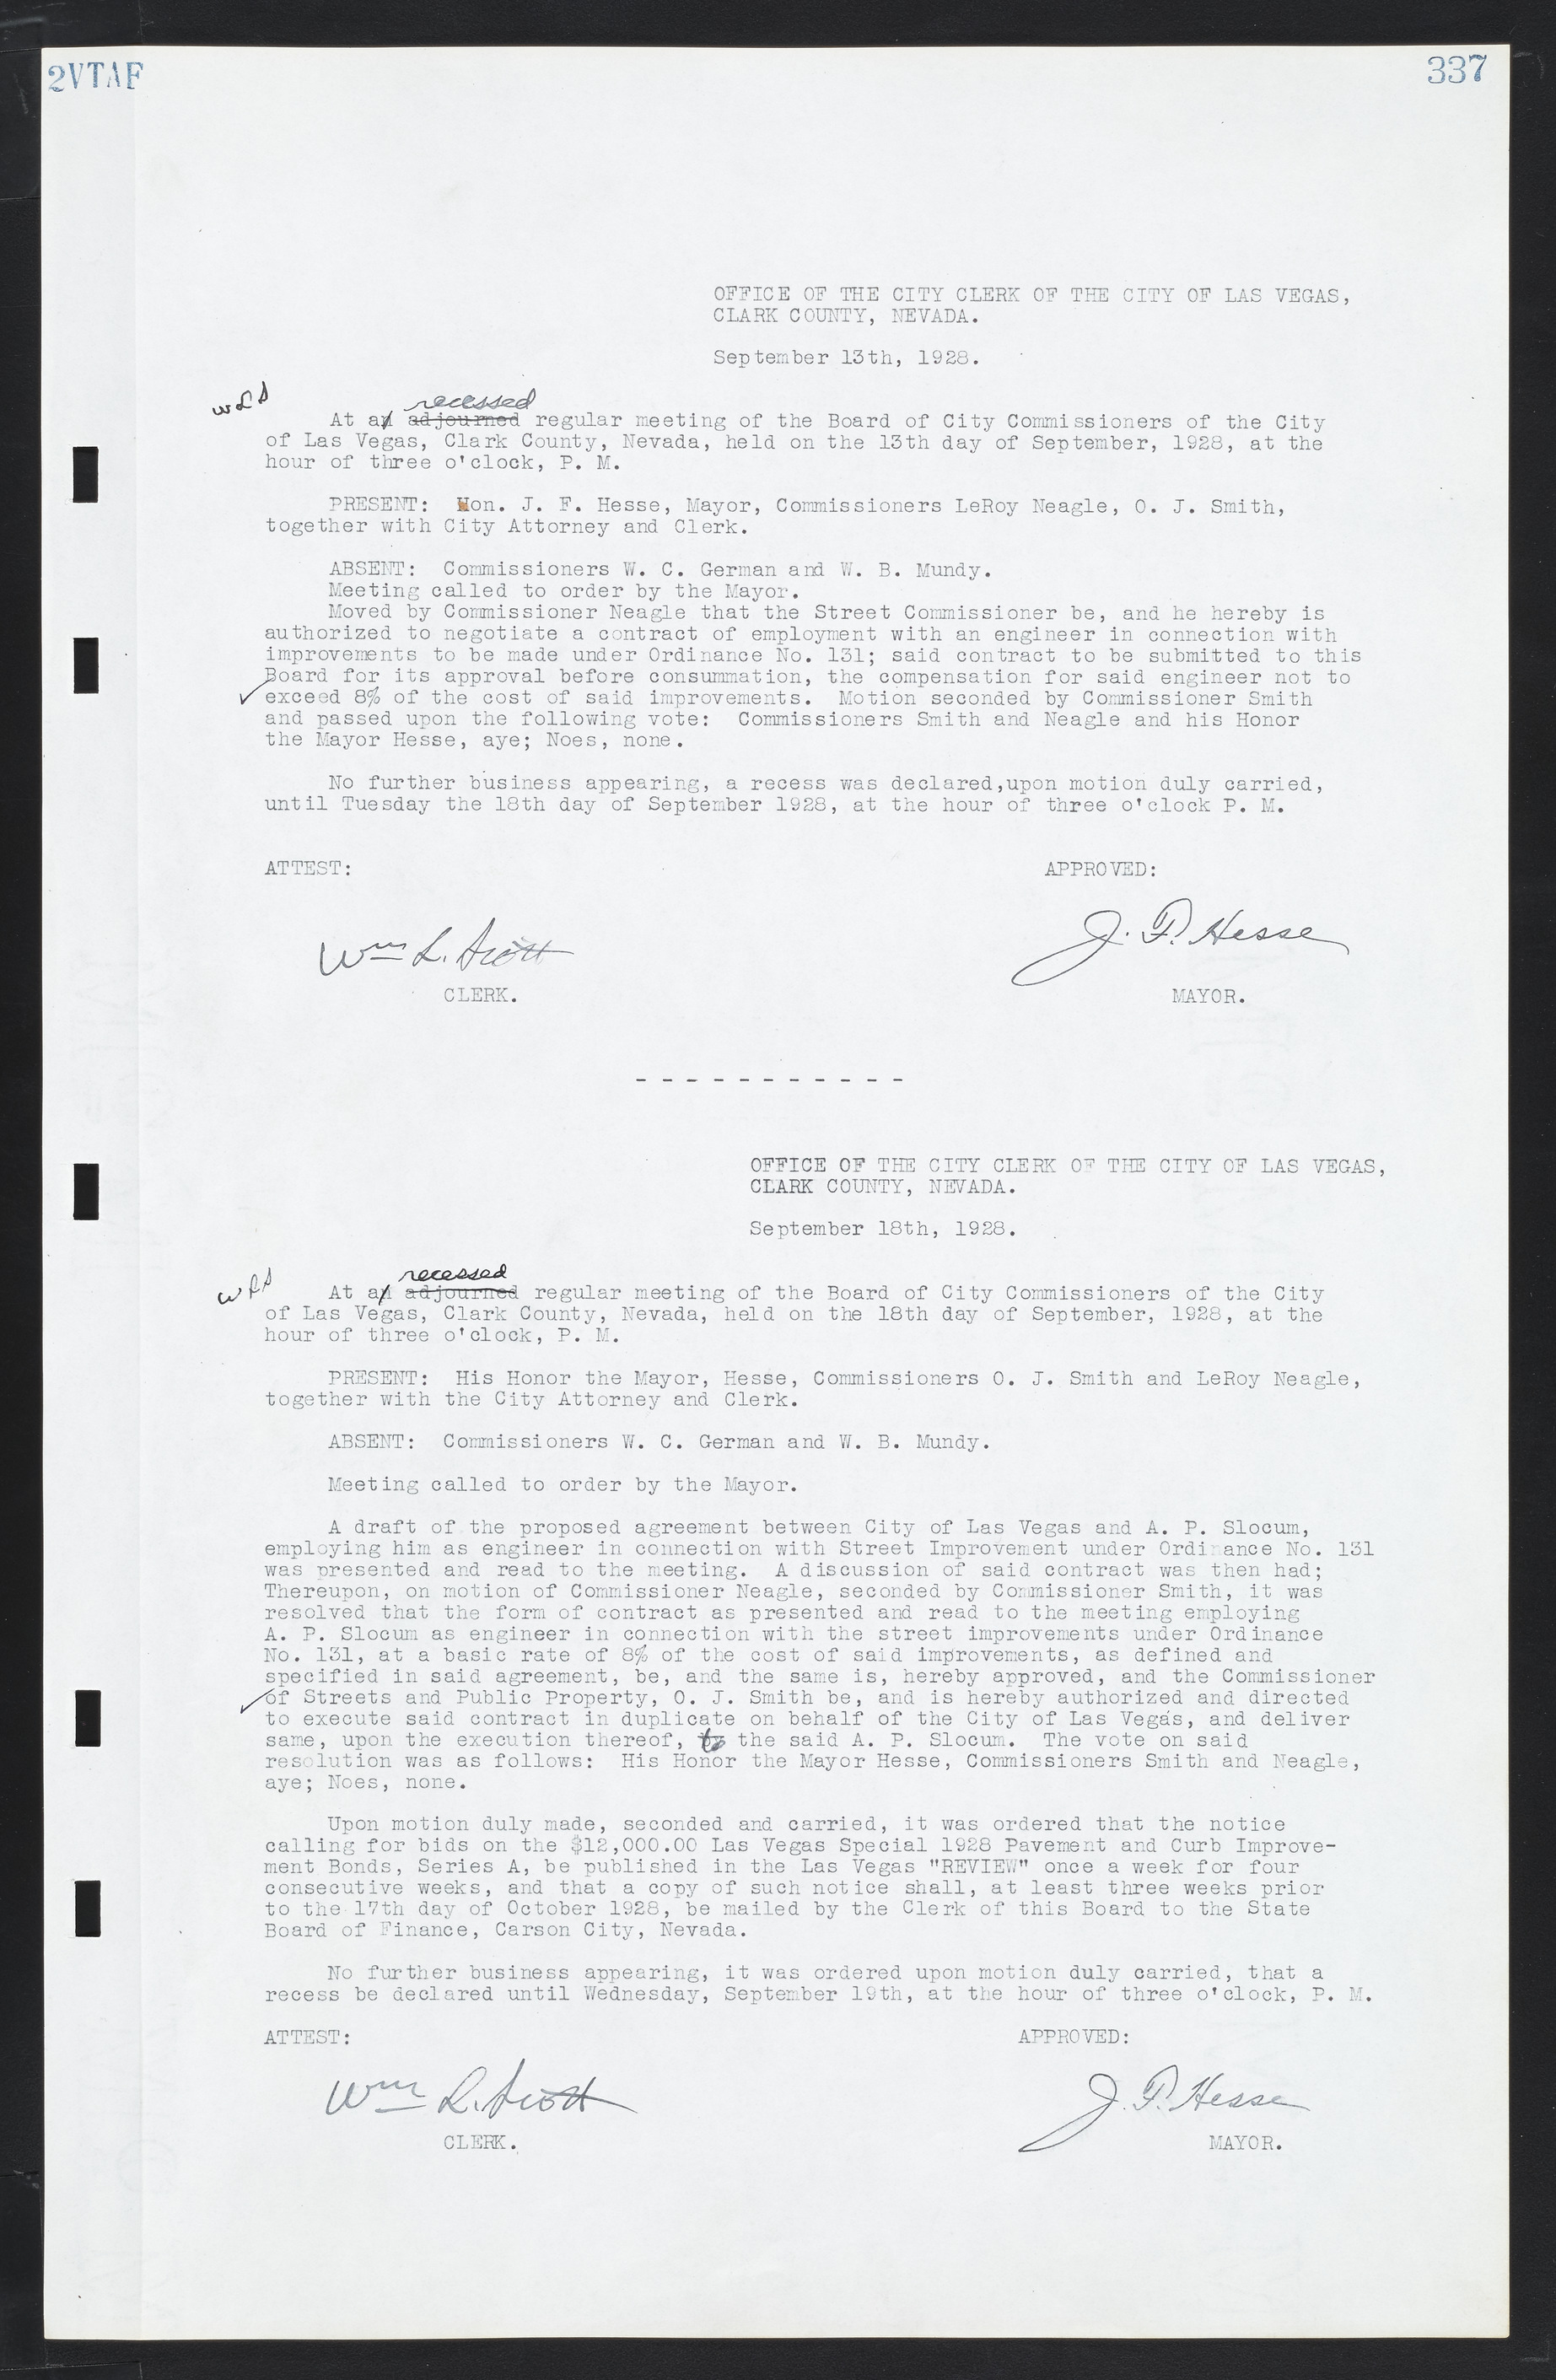 Las Vegas City Commission Minutes, March 1, 1922 to May 10, 1929, lvc000002-346